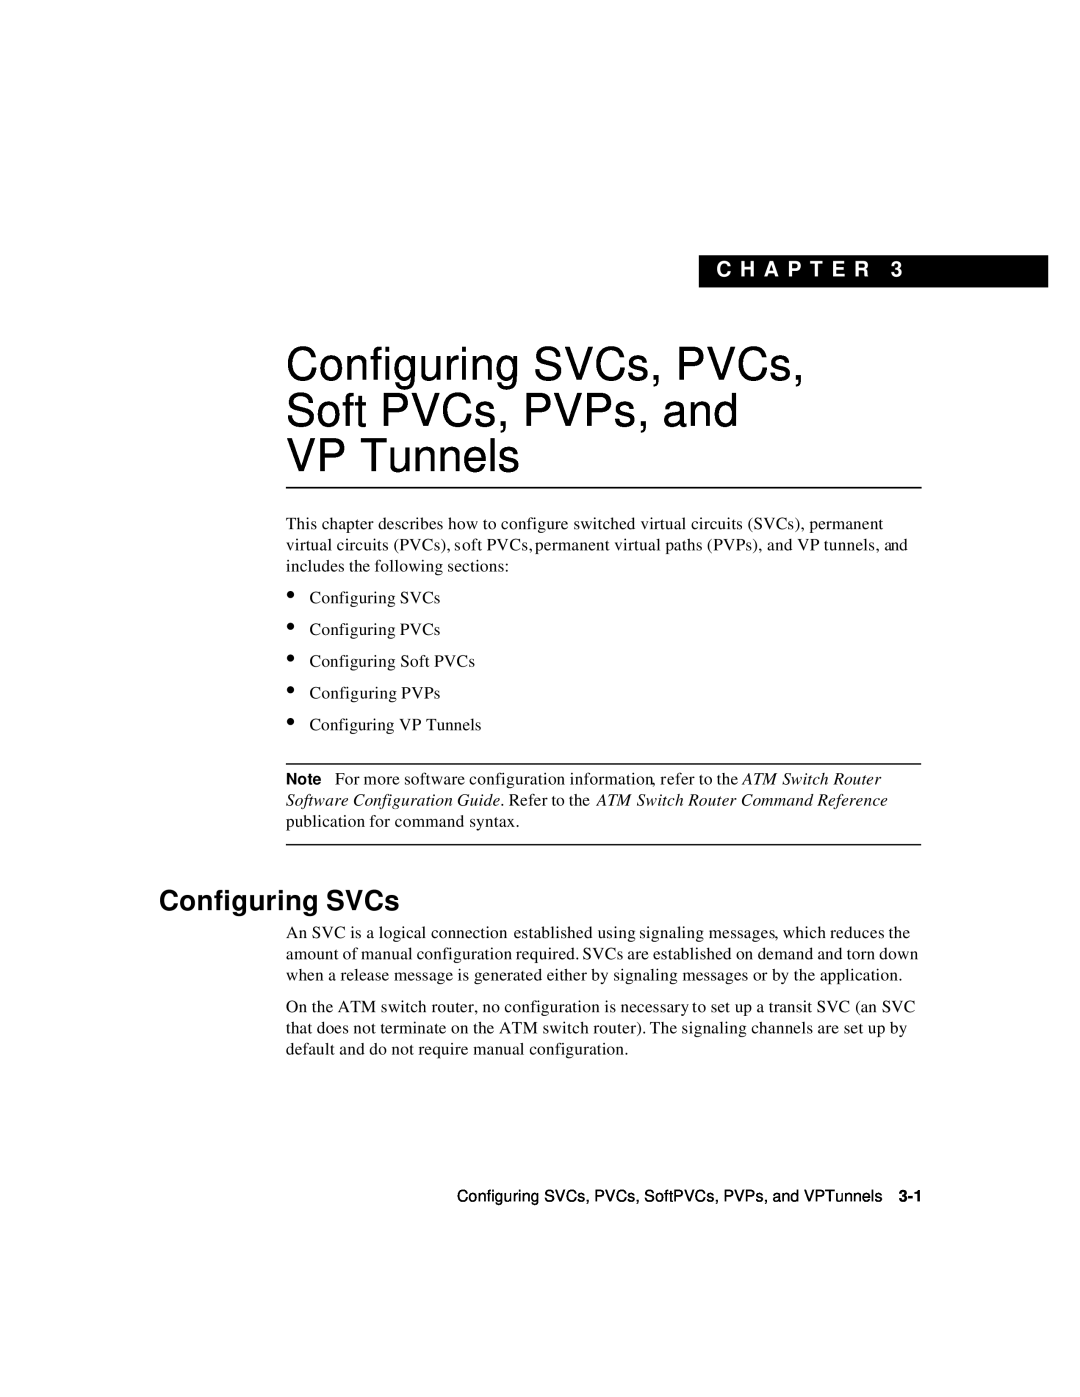 Cisco Systems 78-6897-01 manual Configuring SVCs, PVCs Soft PVCs, PVPs, and VP Tunnels, C H A P T E R 